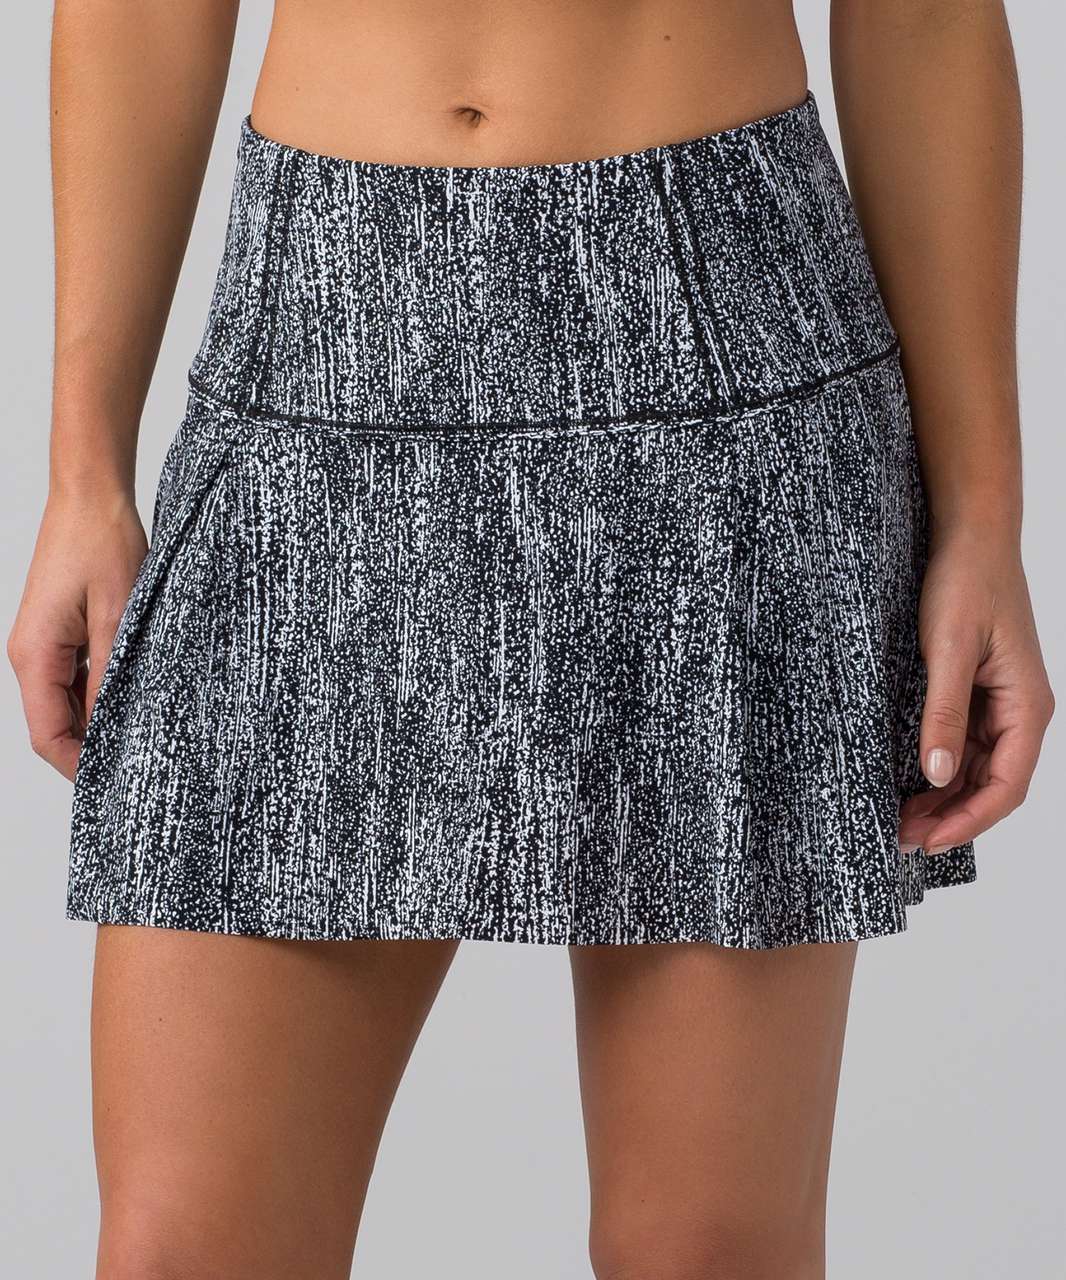 Lululemon Lost In Pace Skirt (Tall) (15") - Air Time White Black